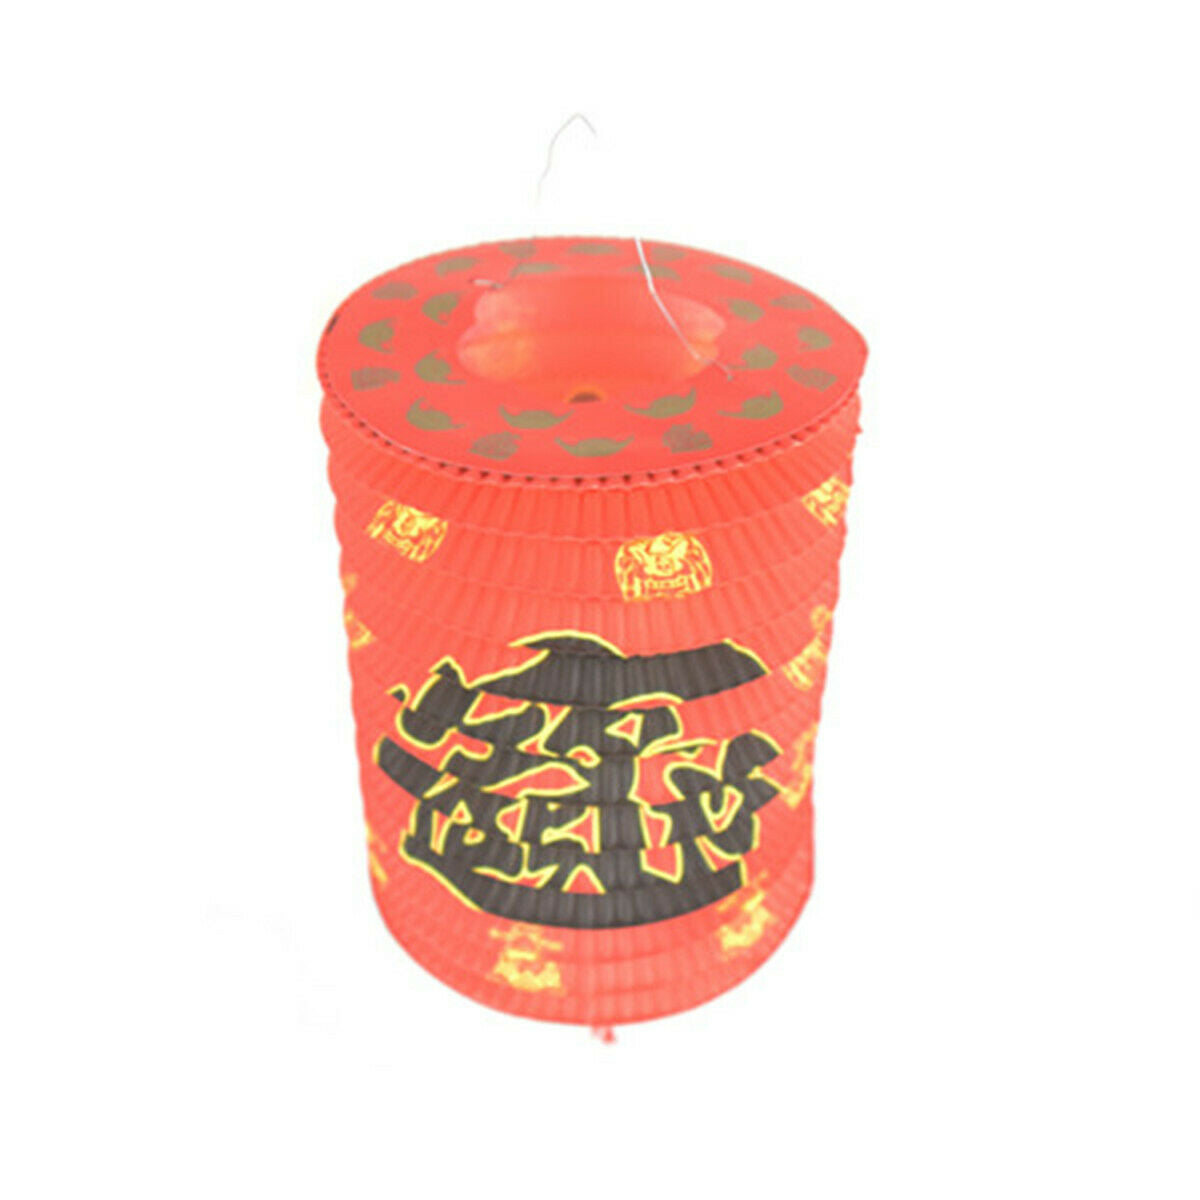 Chinese Asian Hanging Paper Lanterns Festival Party New Year Wedding Xmas Decor